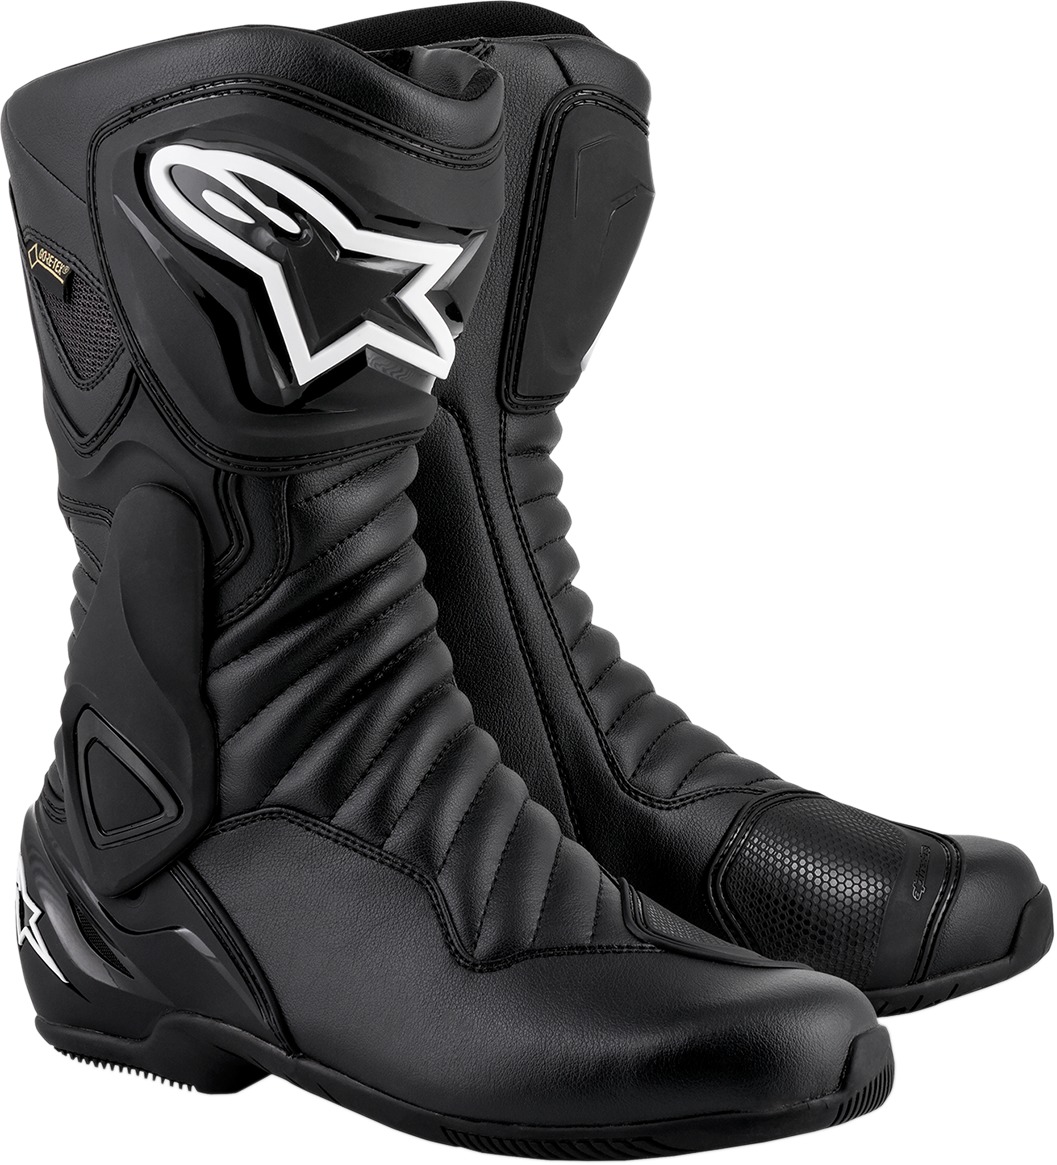 SMX-6 GTX Street Riding Boots Black US 6.5 - Click Image to Close